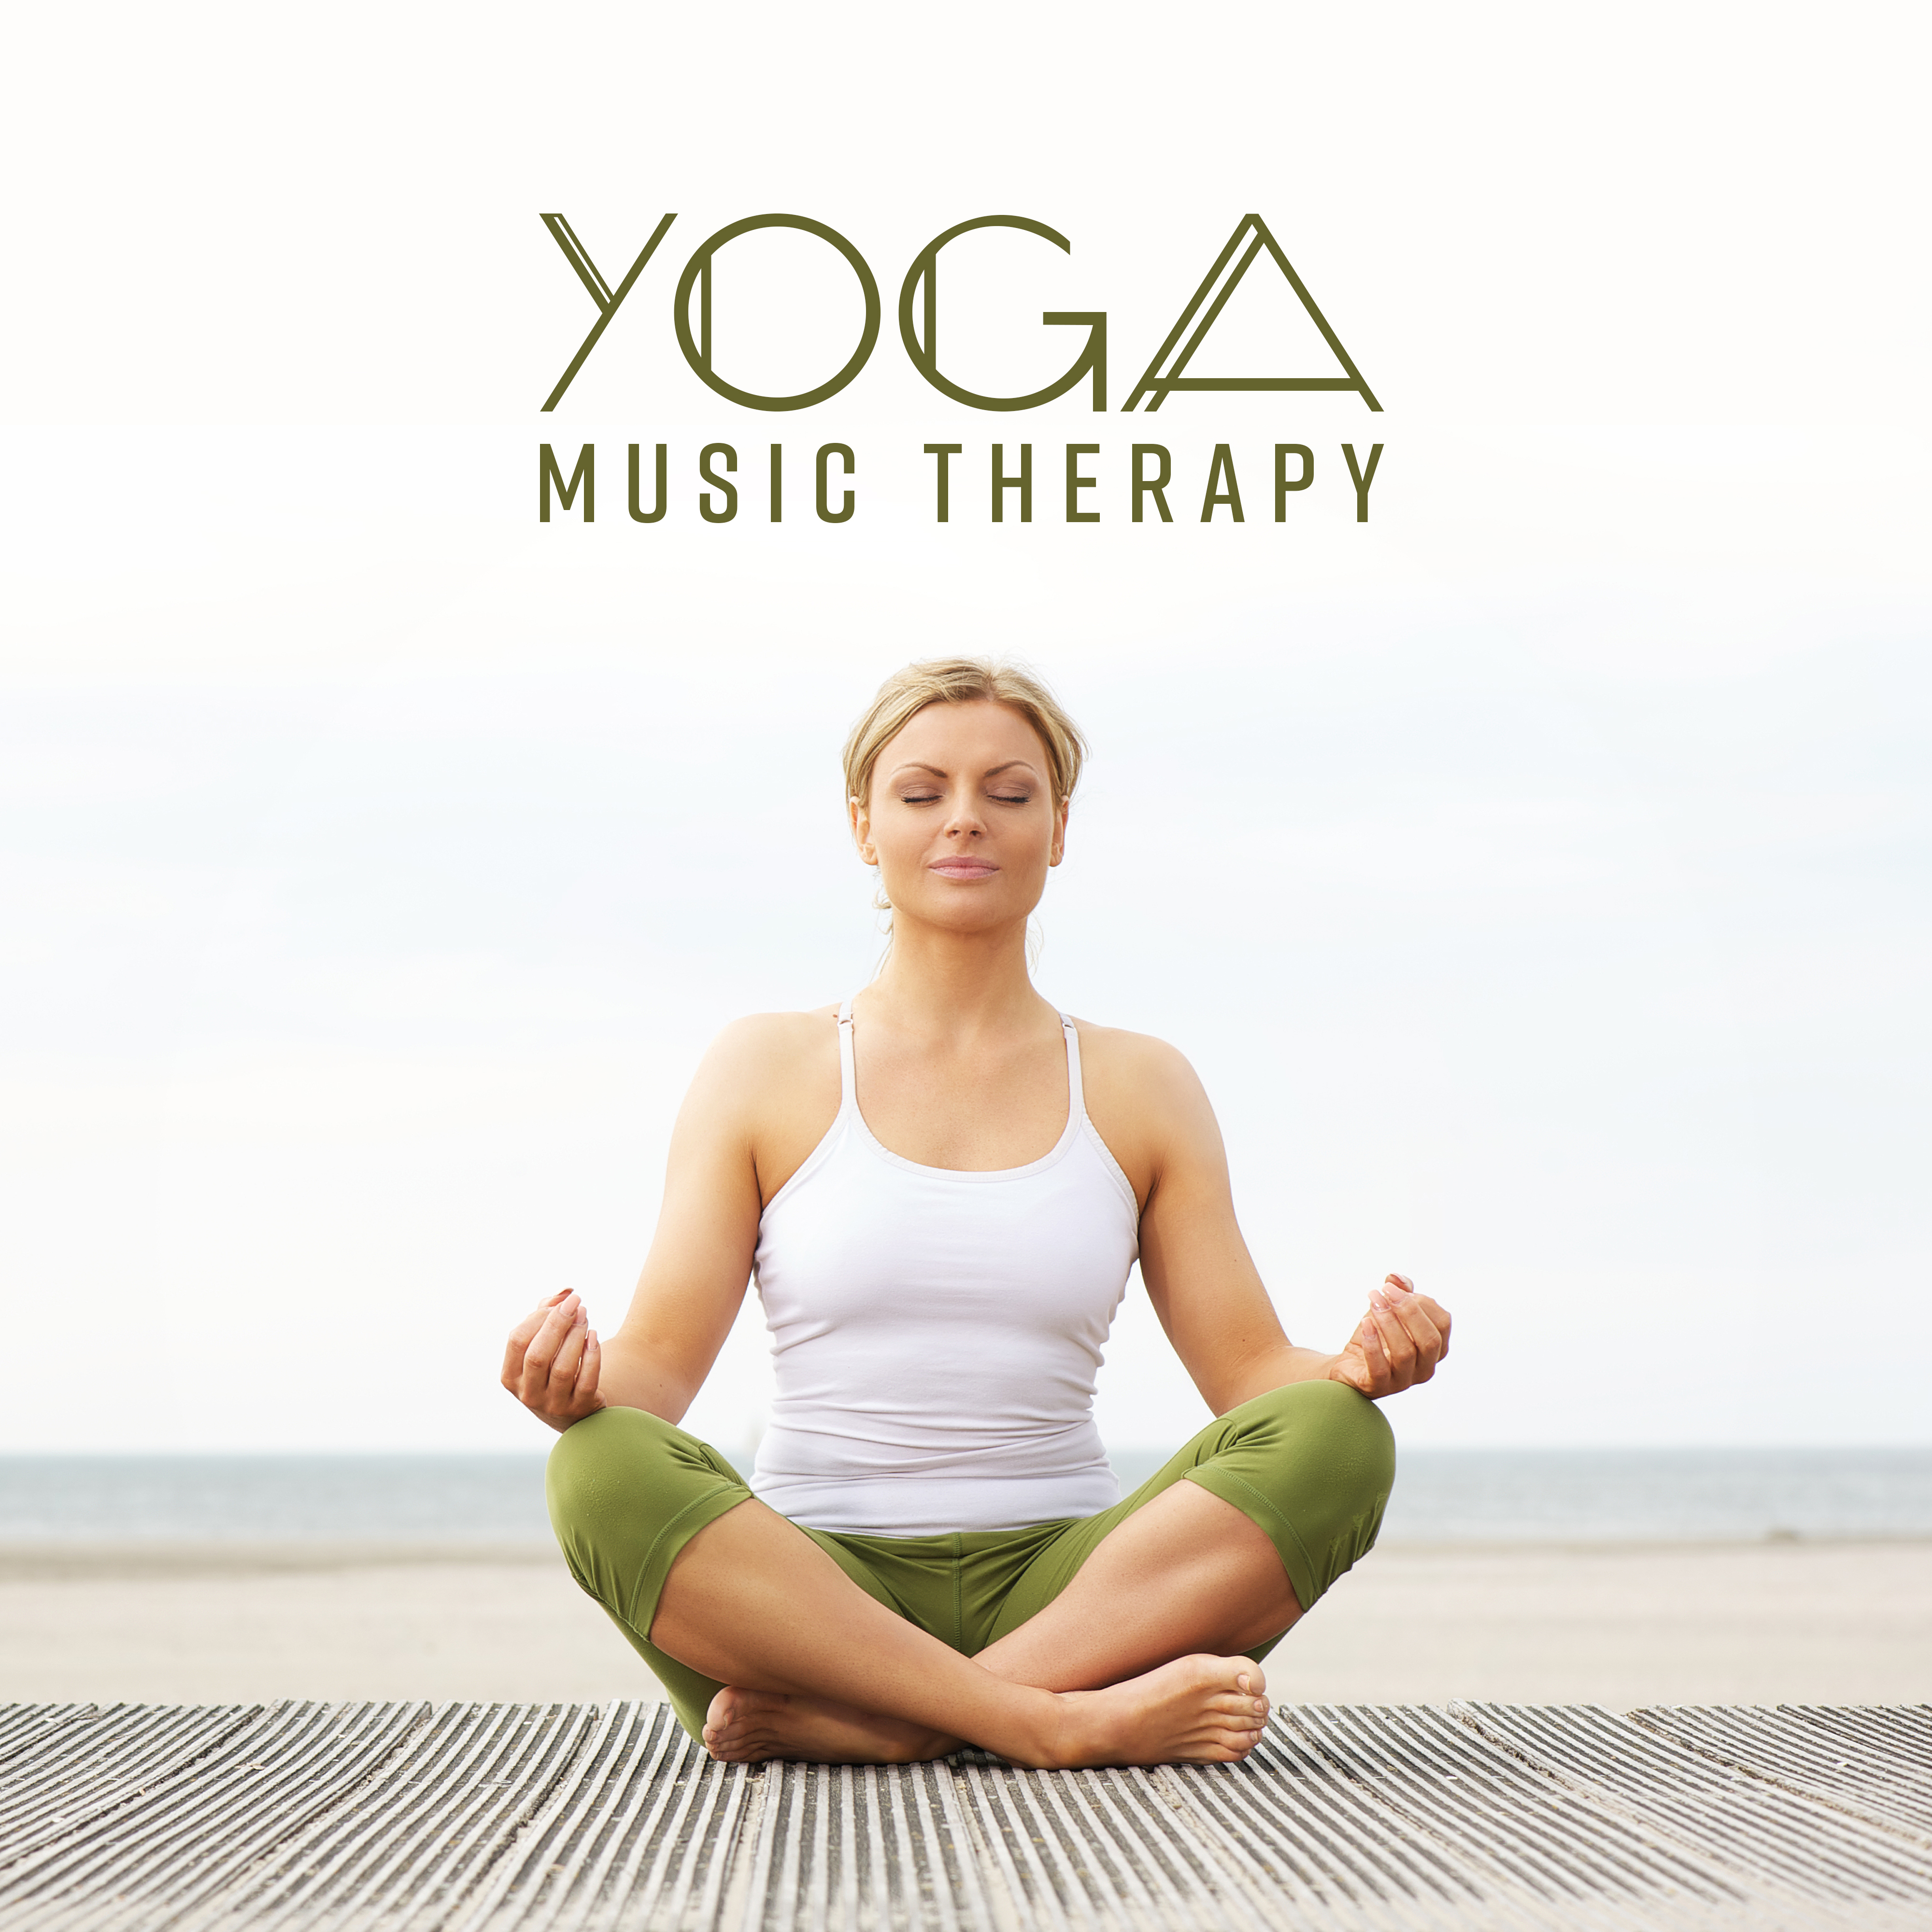 Yoga Music Therapy